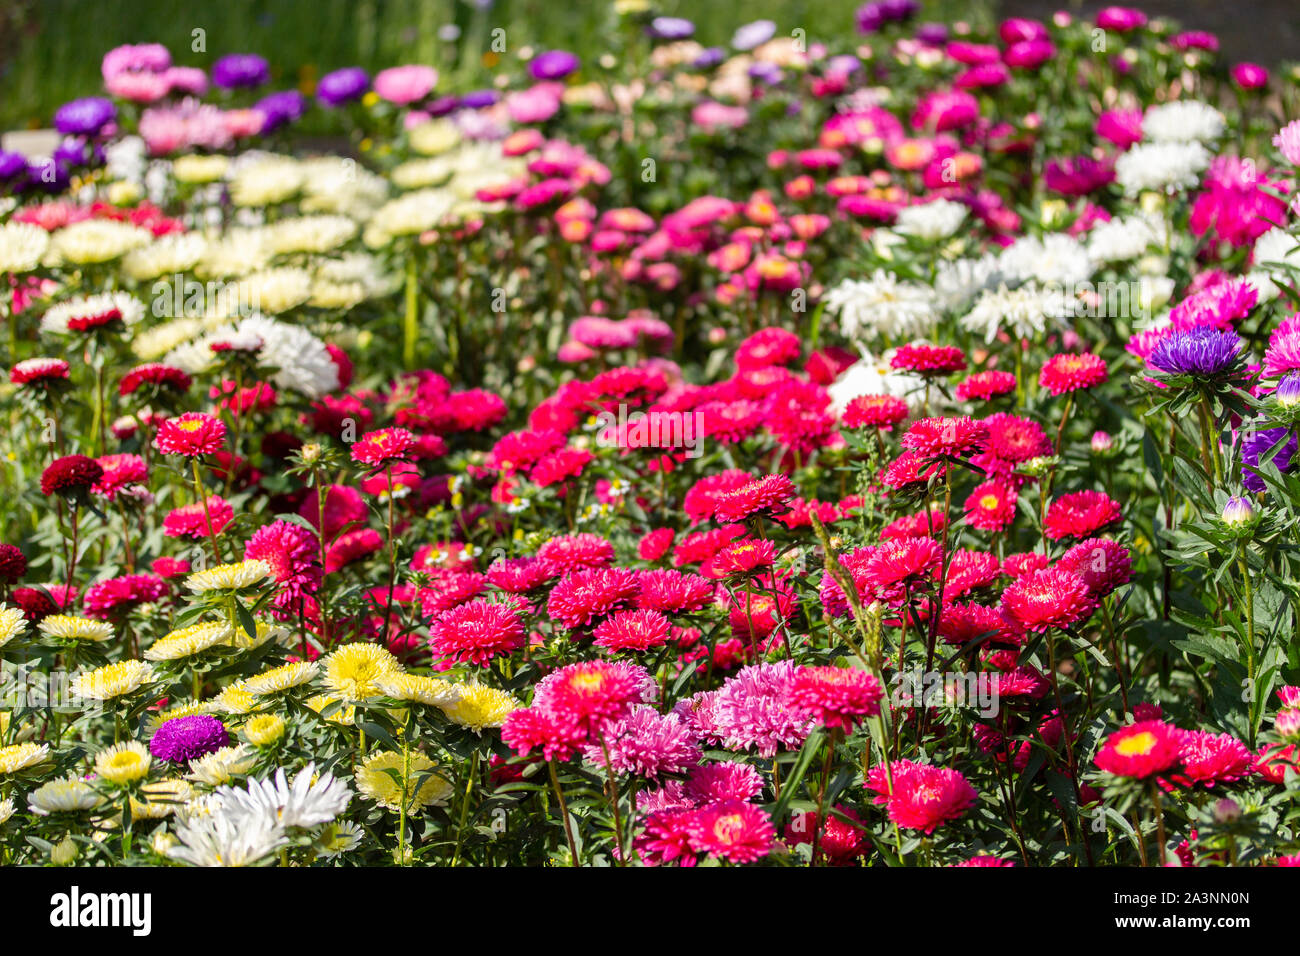 Many Callistephus Flowers Red Pink White Flower Garden Background Wallpaper Horizontal Daisy Asters Of Different Colors Autumn Bloom Stock Photo Alamy